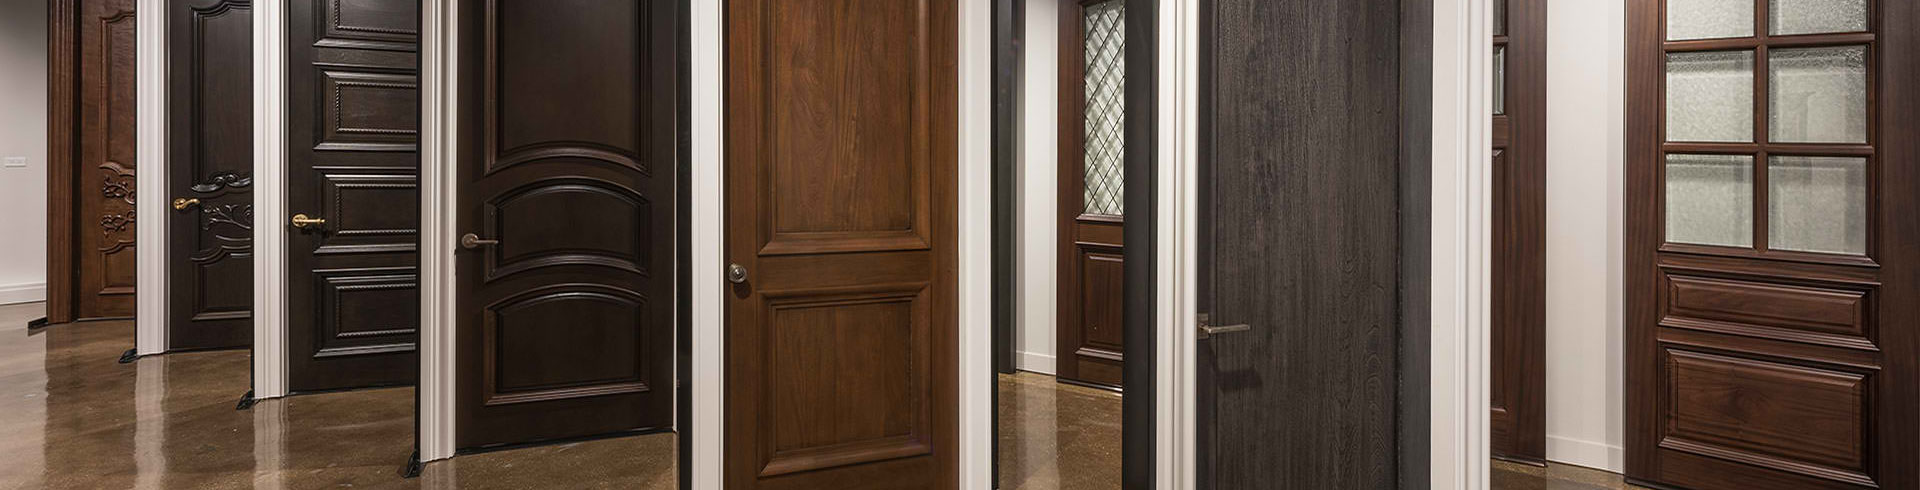 <h1>Internal Doors</h1><p>Internal Doors can be built in an endless variety of styles: featured timbers, painted and even incorporating Leadlight.  <a href='doors.html'>Learn More ></a></p>